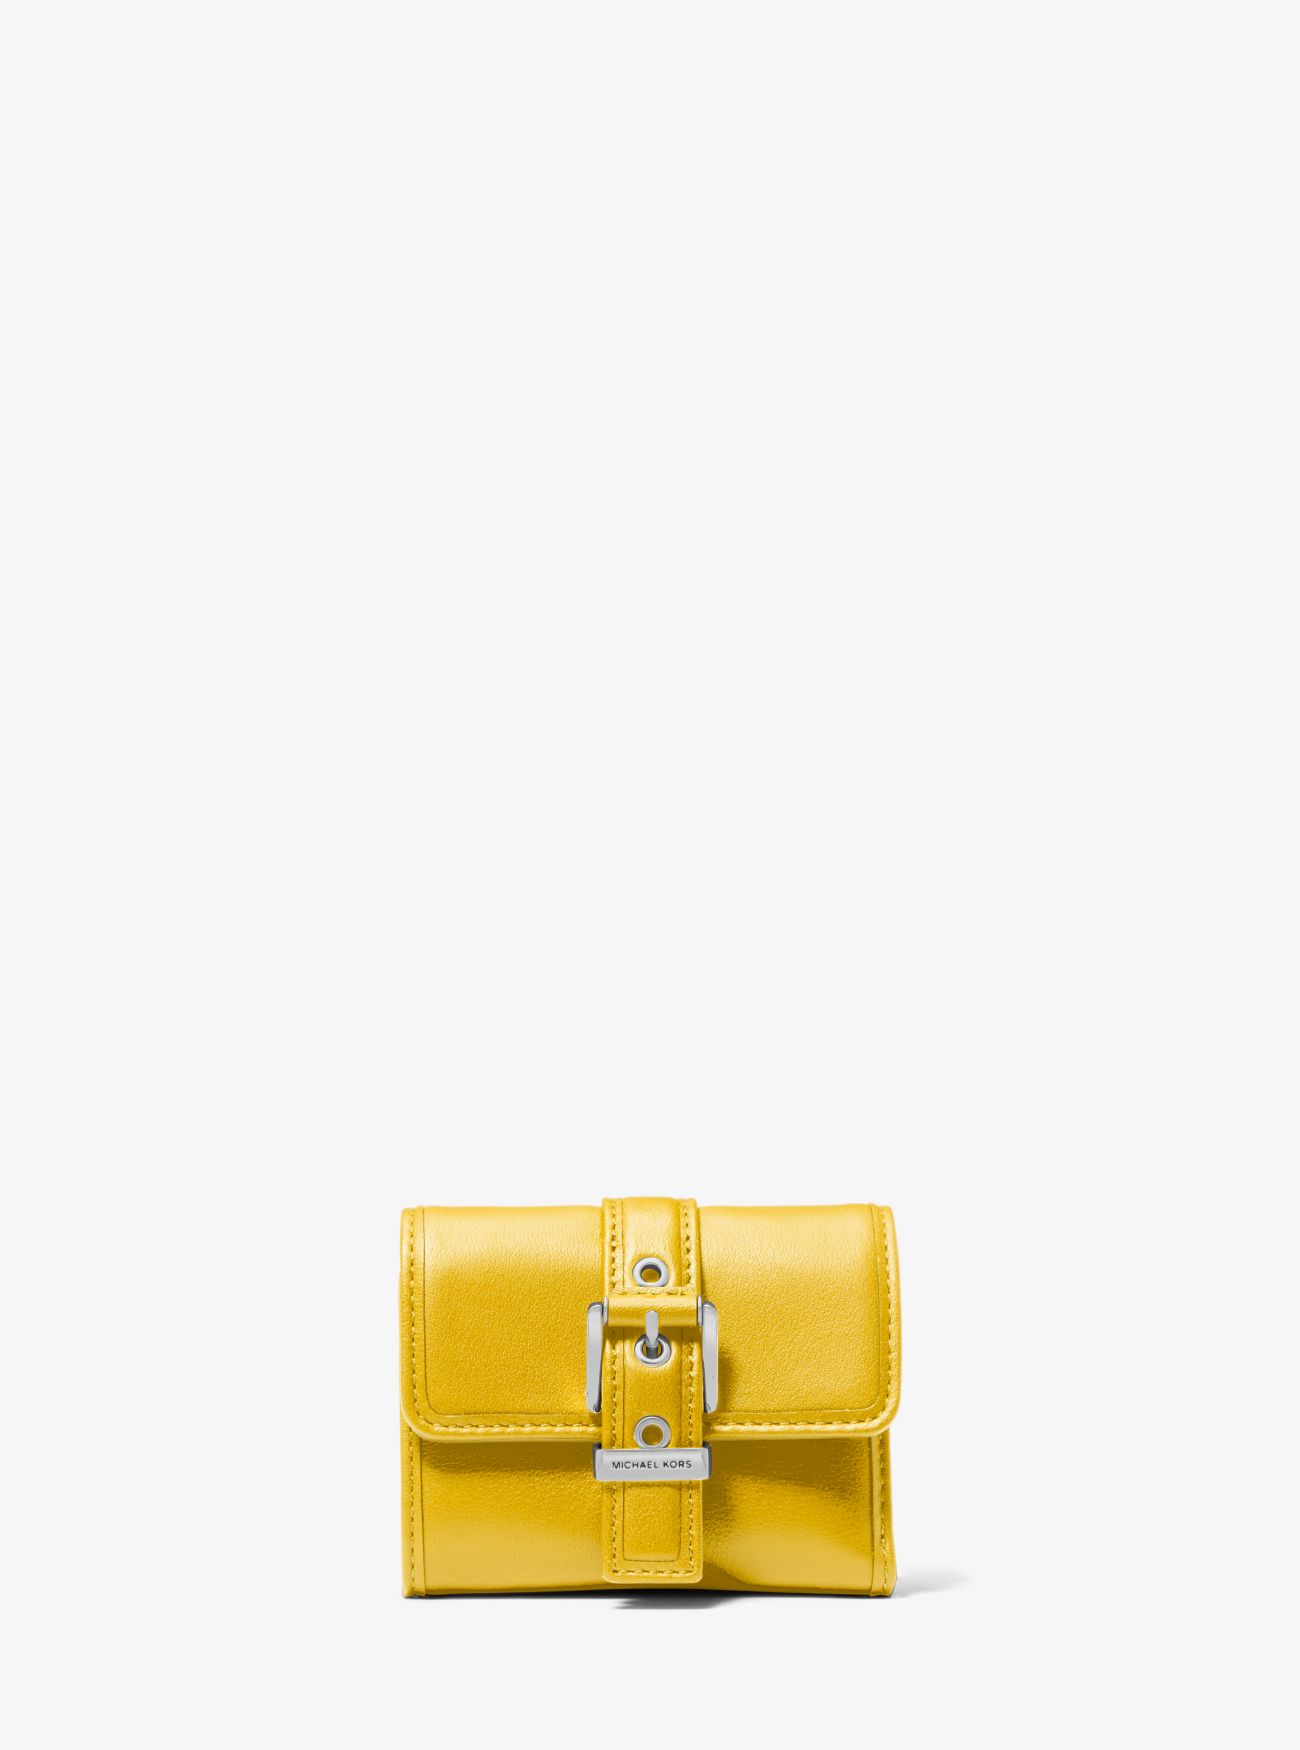 MK Colby Small Leather Tri-Fold Wallet - Yellow - Michael Kors